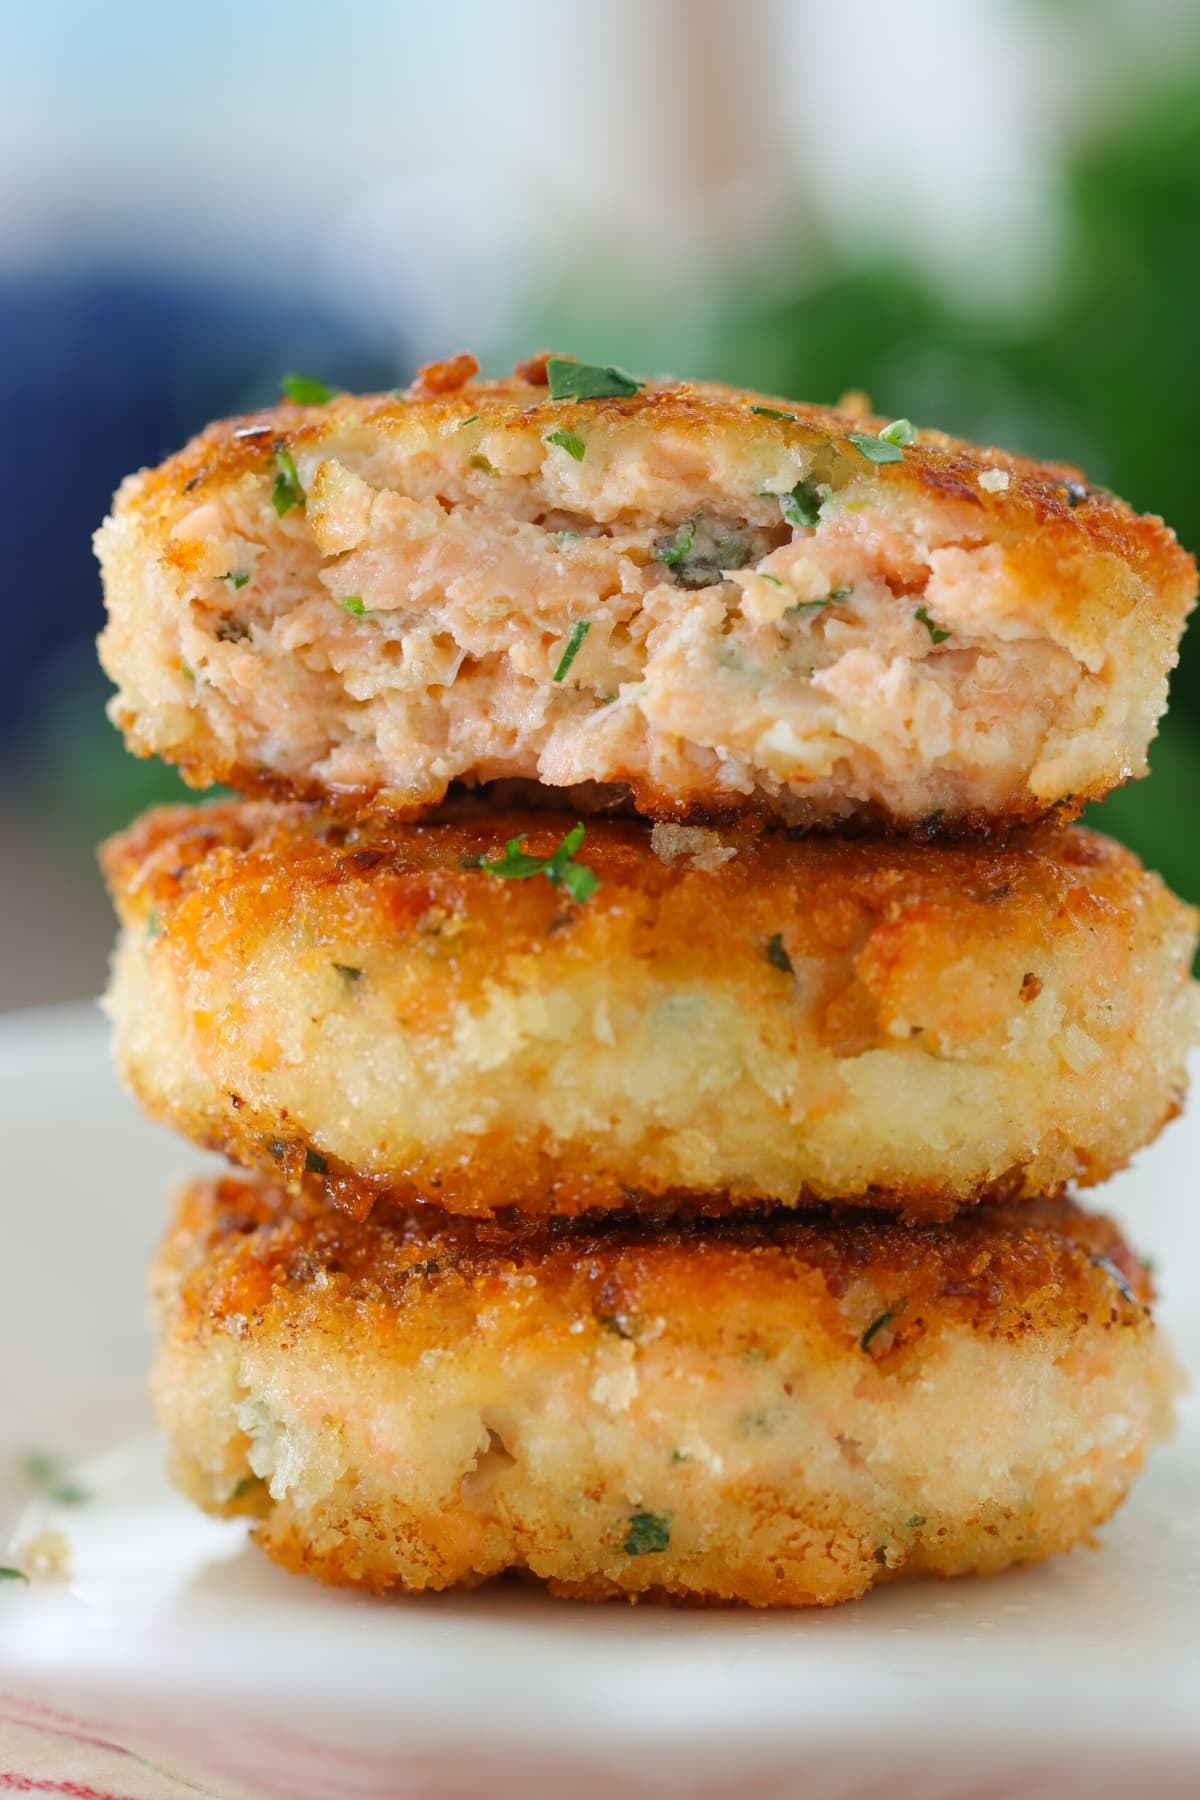 EASY Salmon Burgers Recipe - How to Cook Salmon Burgers Perfectly!